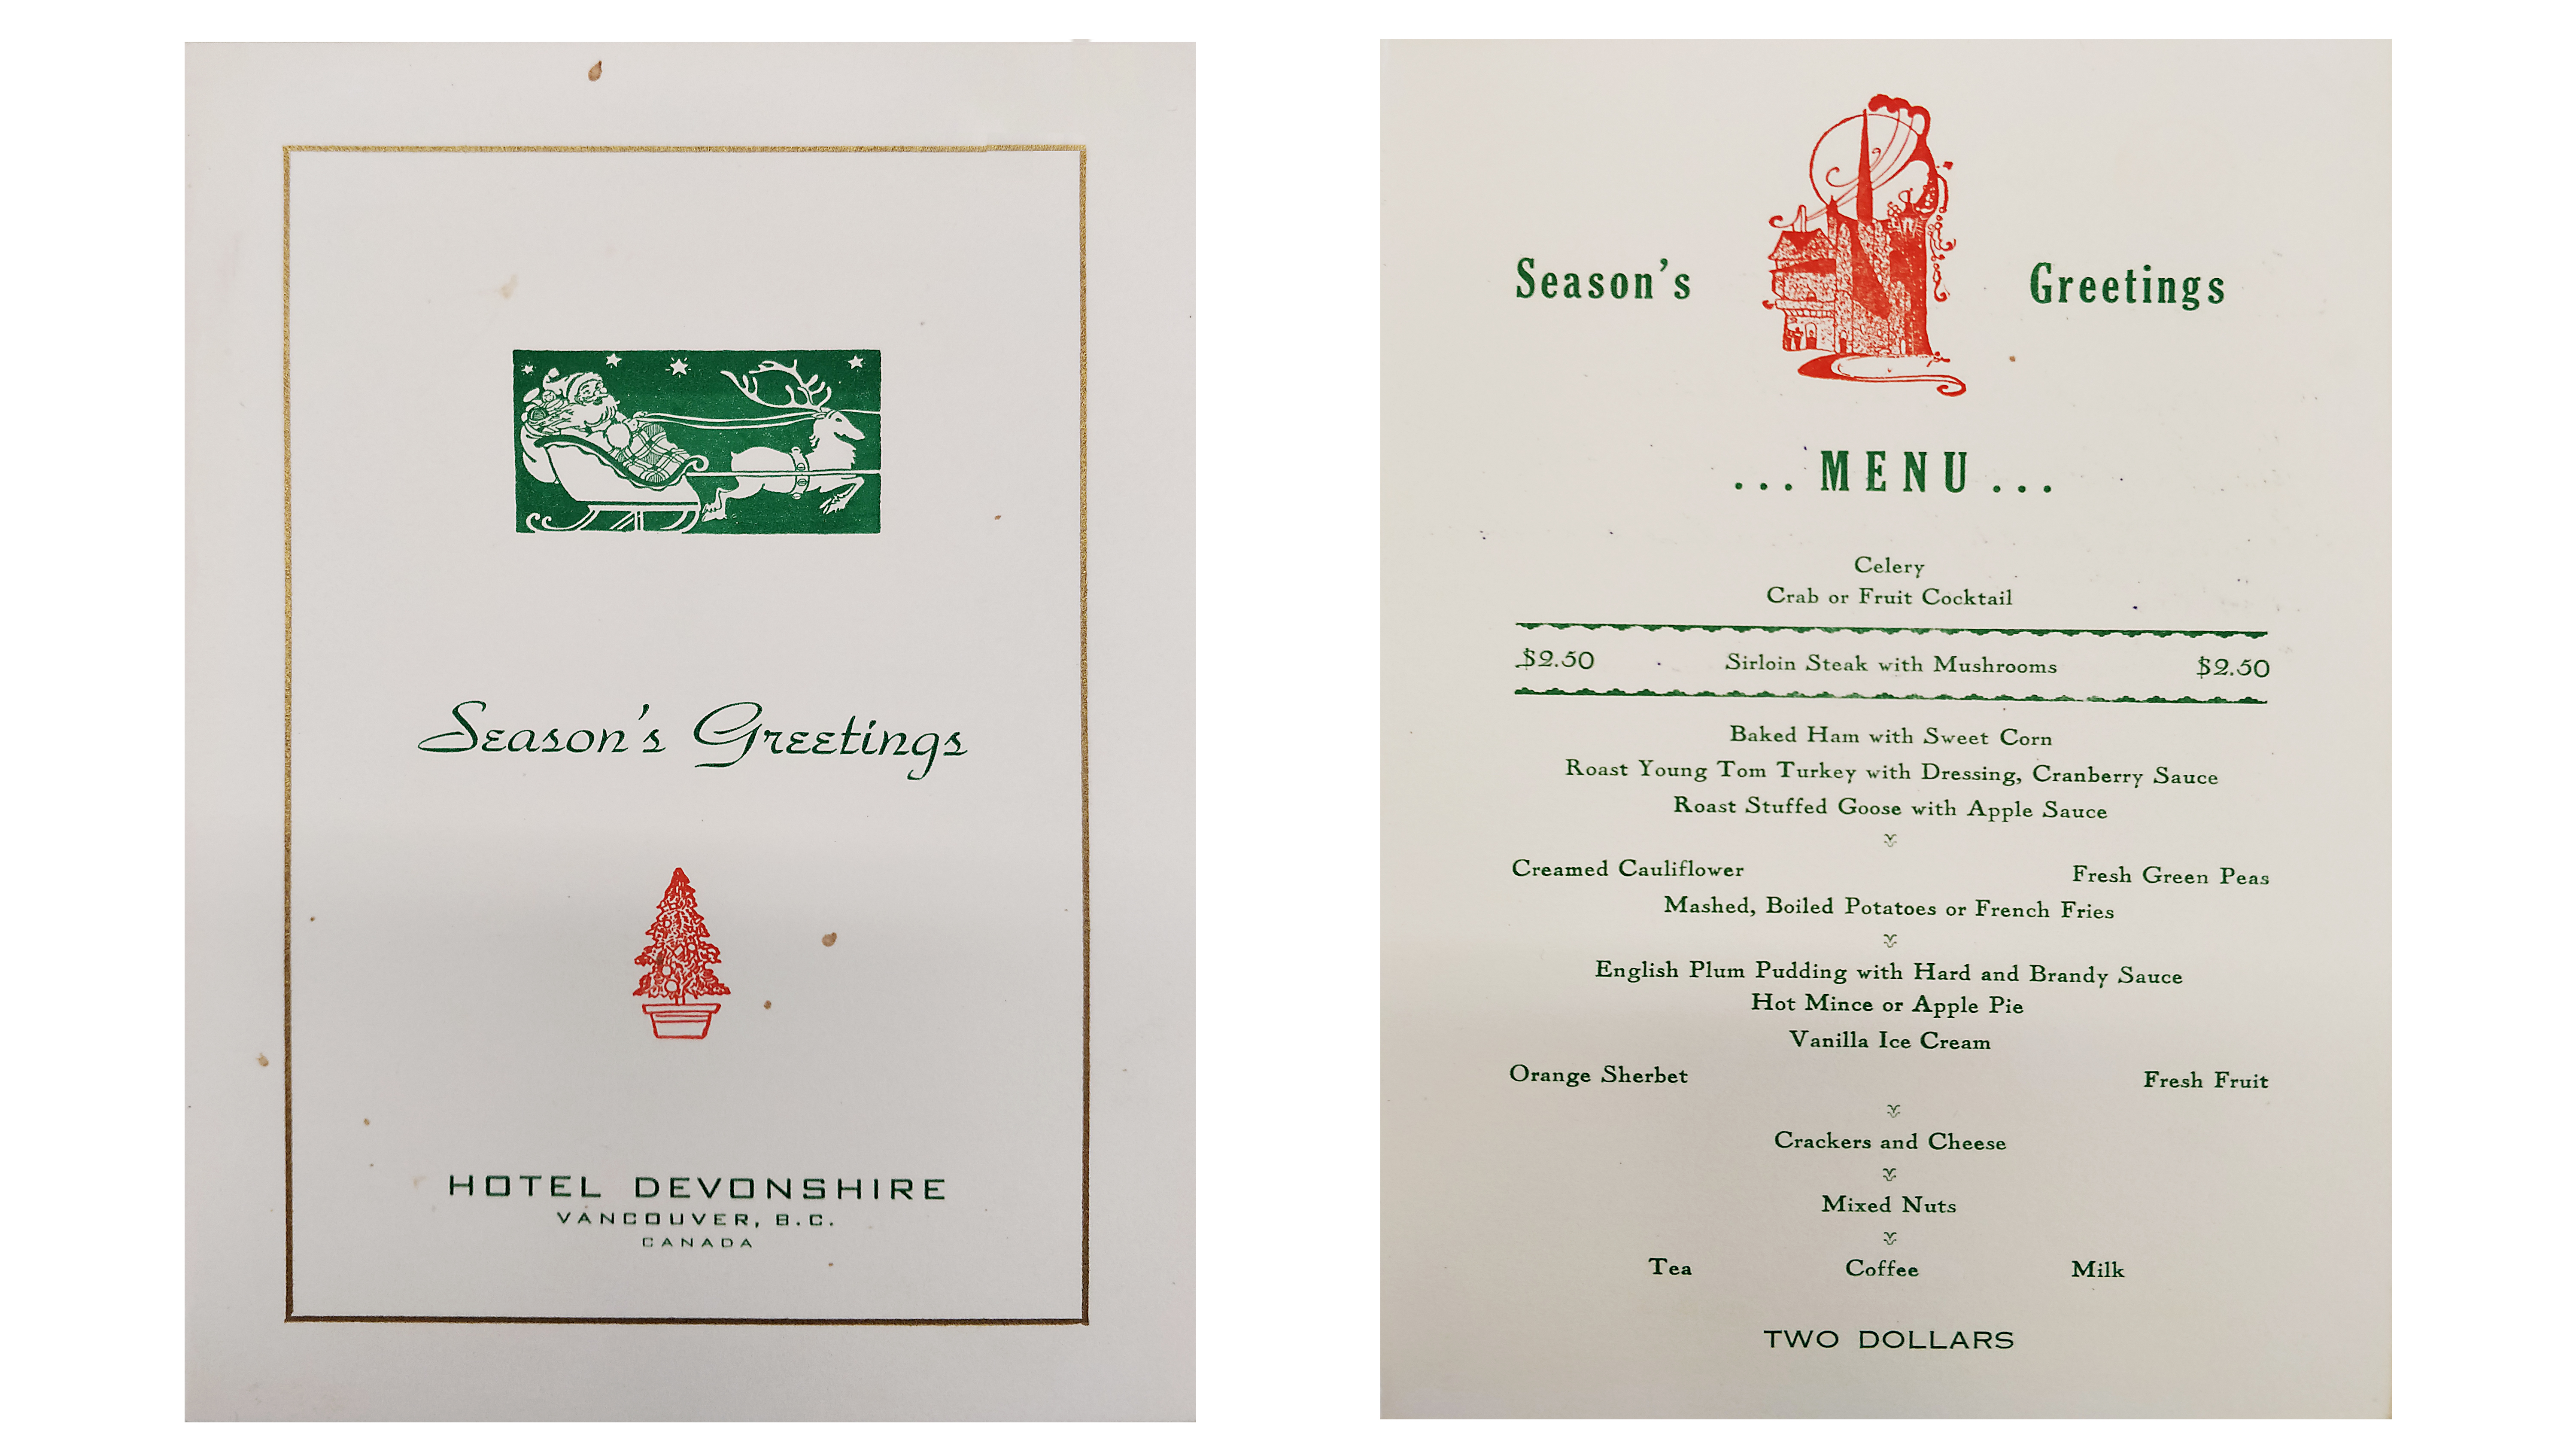 A holiday menu from Vancouver's Hotel Devonshire, 1950.